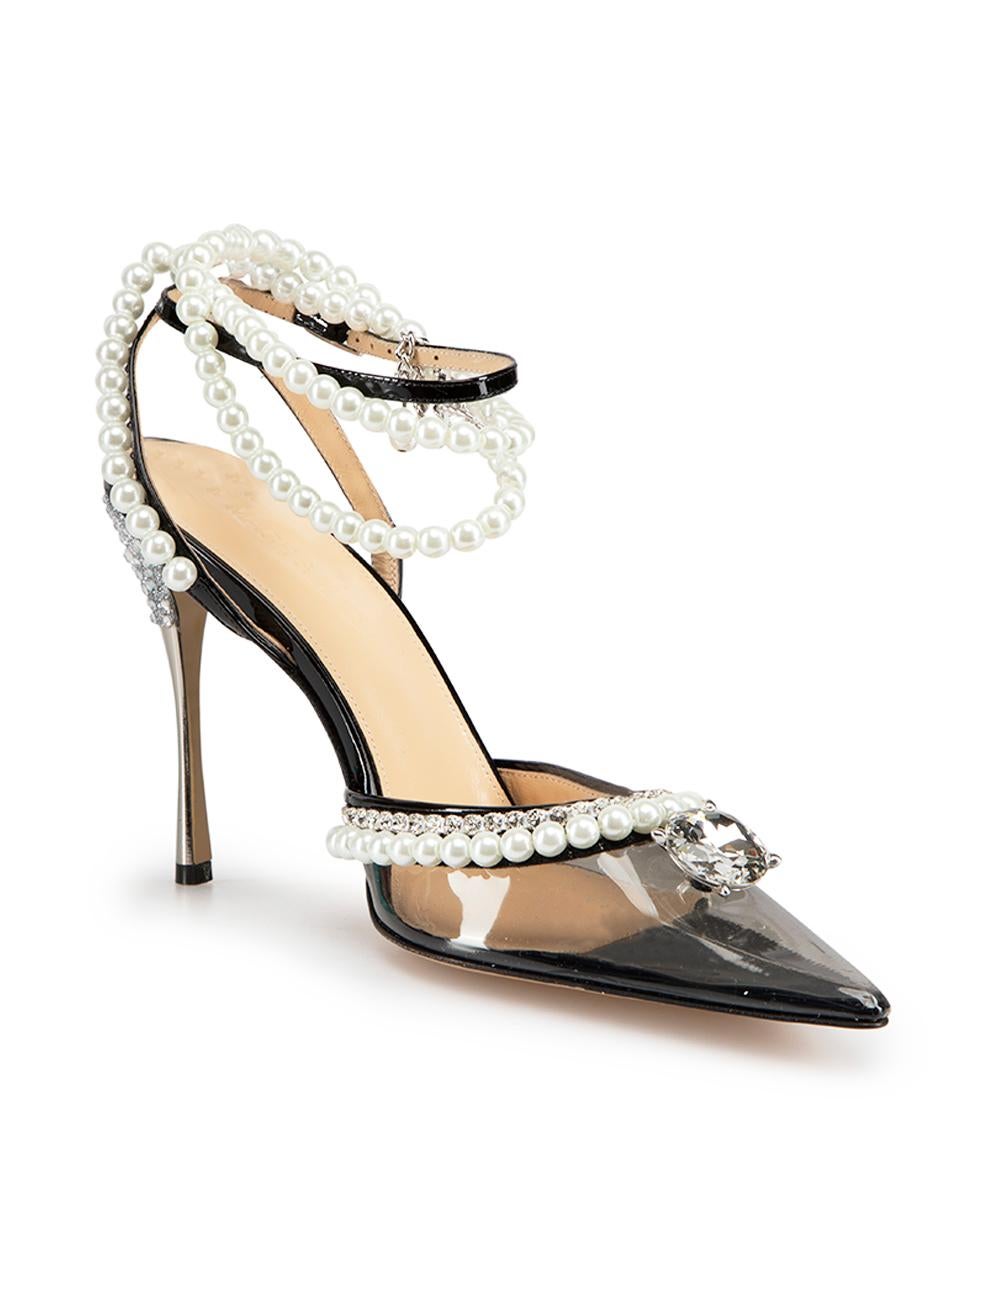 CONDITION is Never worn. No visible wear to shoes is evident on this new Mach & Mach designer resale item. These shoes come with original dust bag.

Details
Diamond of Elizabeth
Black 
PVC
Heels
Point toe 
Wrap around pearl strap
Crystal